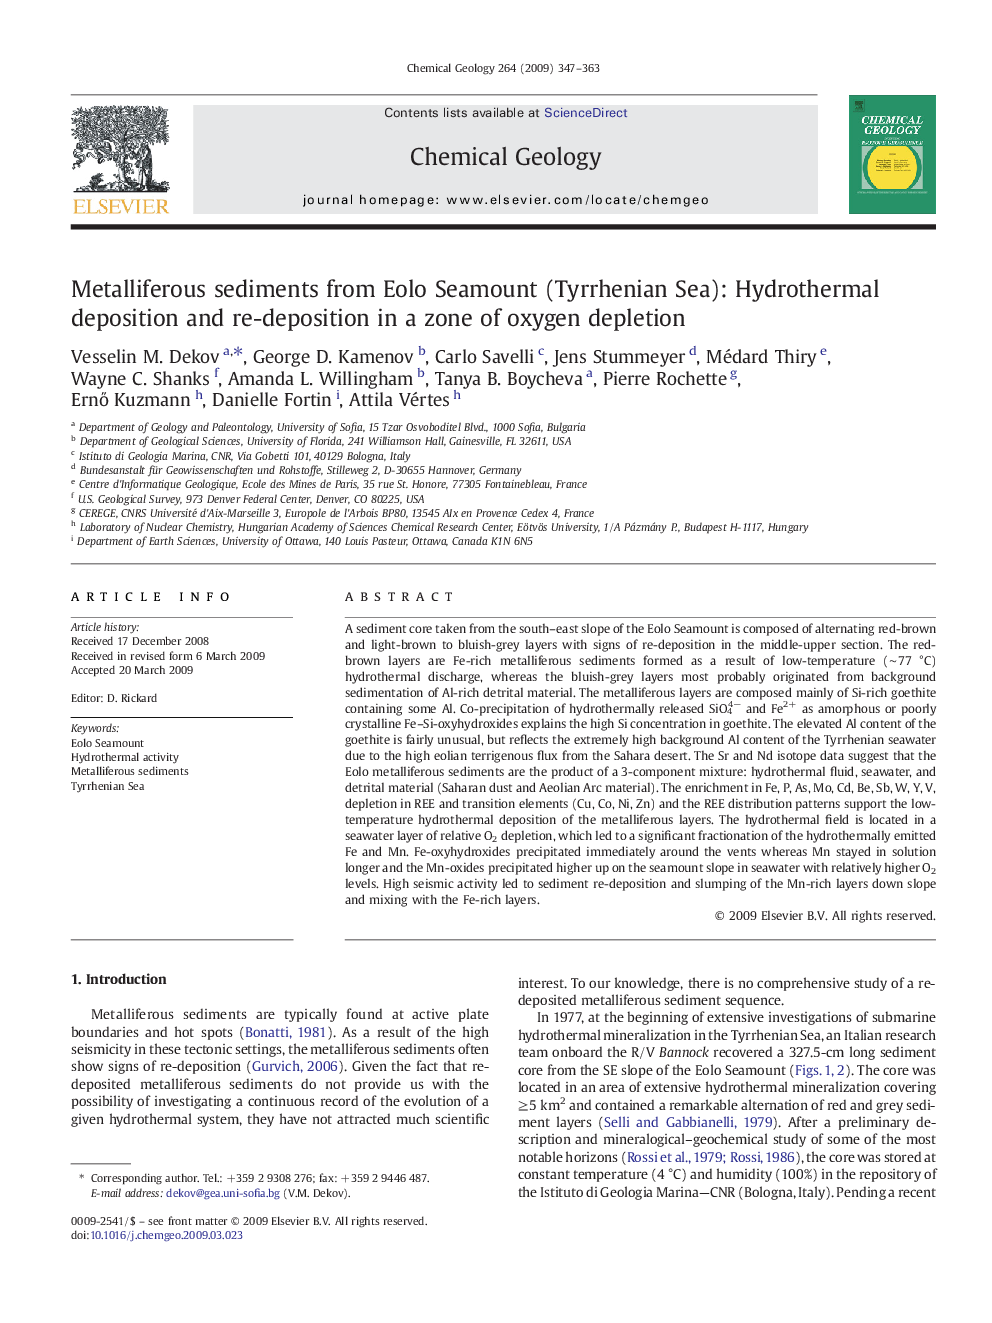 Metalliferous sediments from Eolo Seamount (Tyrrhenian Sea): Hydrothermal deposition and re-deposition in a zone of oxygen depletion